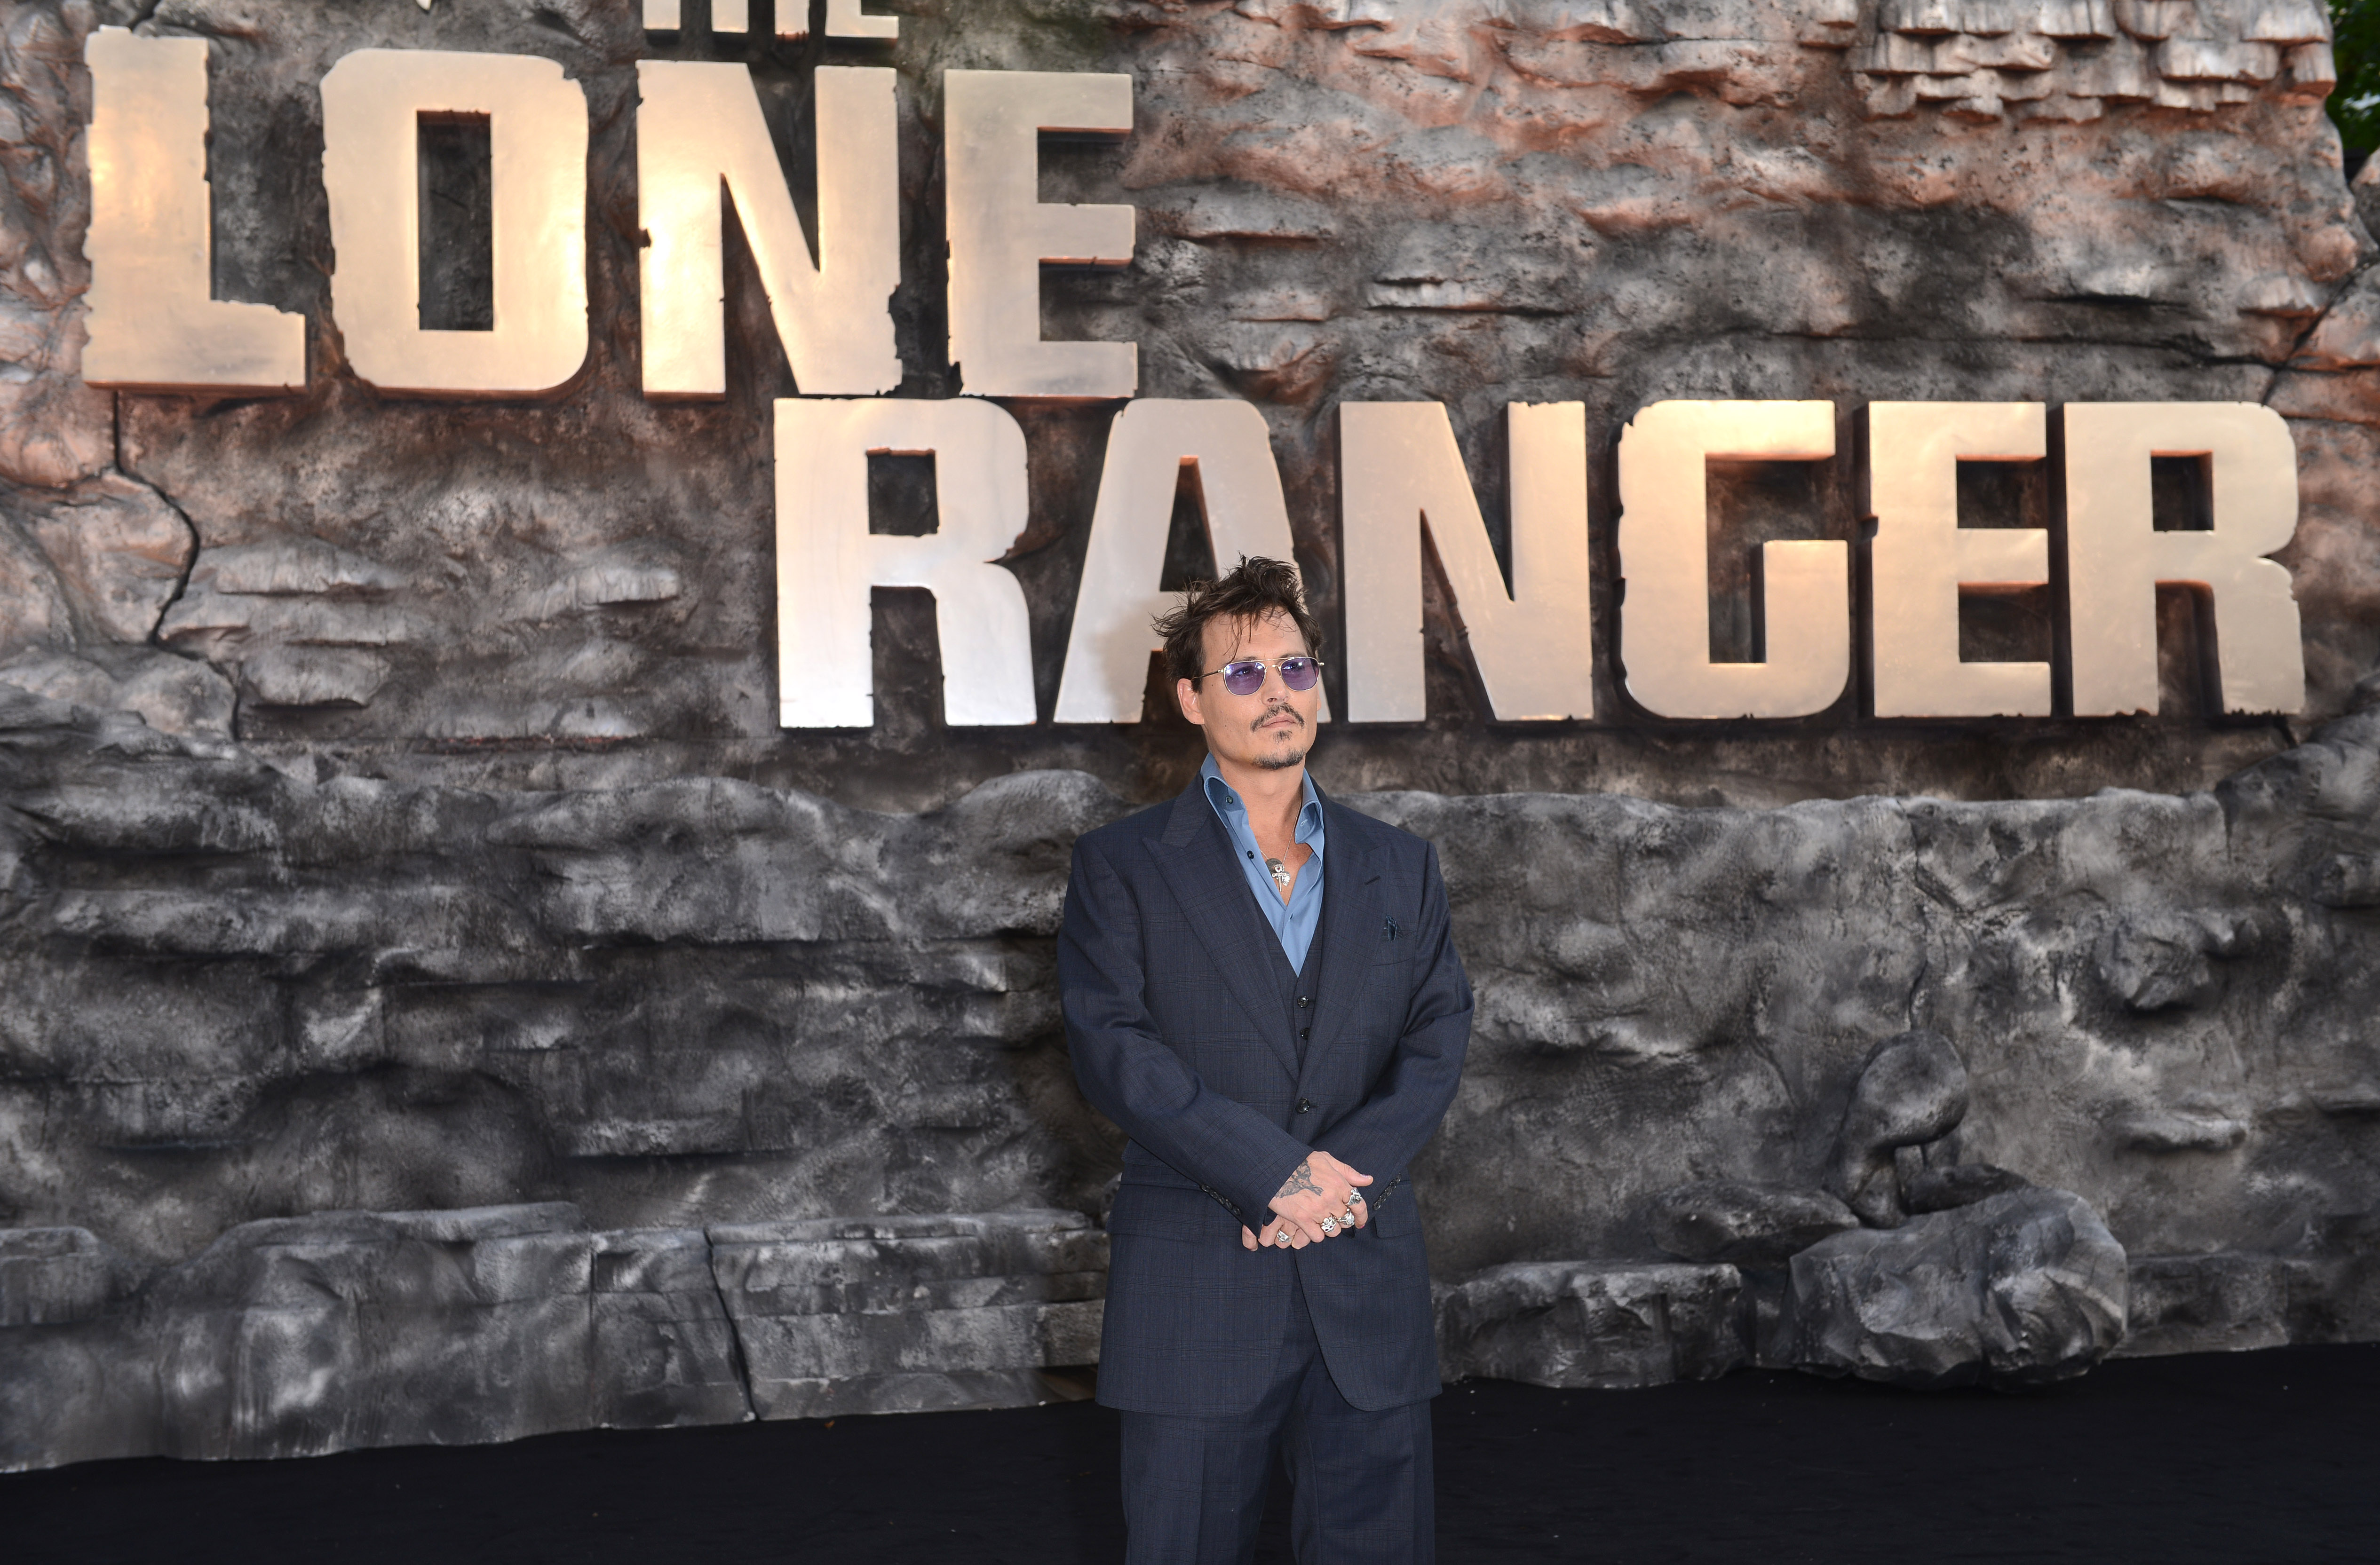 Johnny Depp at the UK premiere of "The Lone Ranger" in London, England on July 21, 2013 | Source: Getty Images